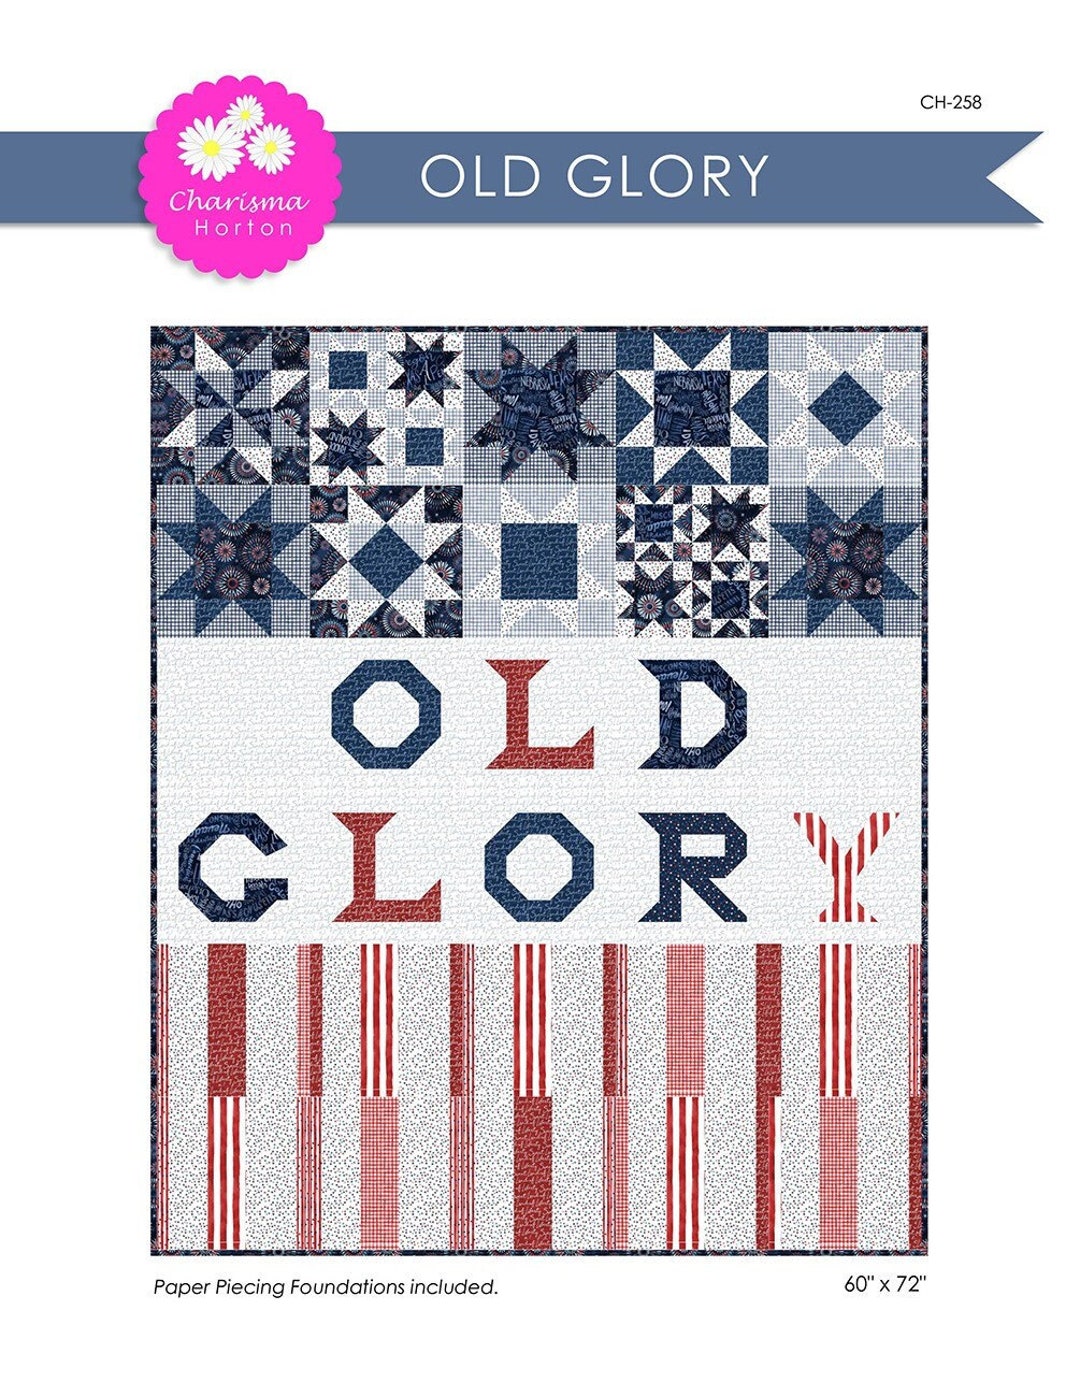 Old Glory Quilt Quilting Pattern From Charisma Horton Patterns Brand